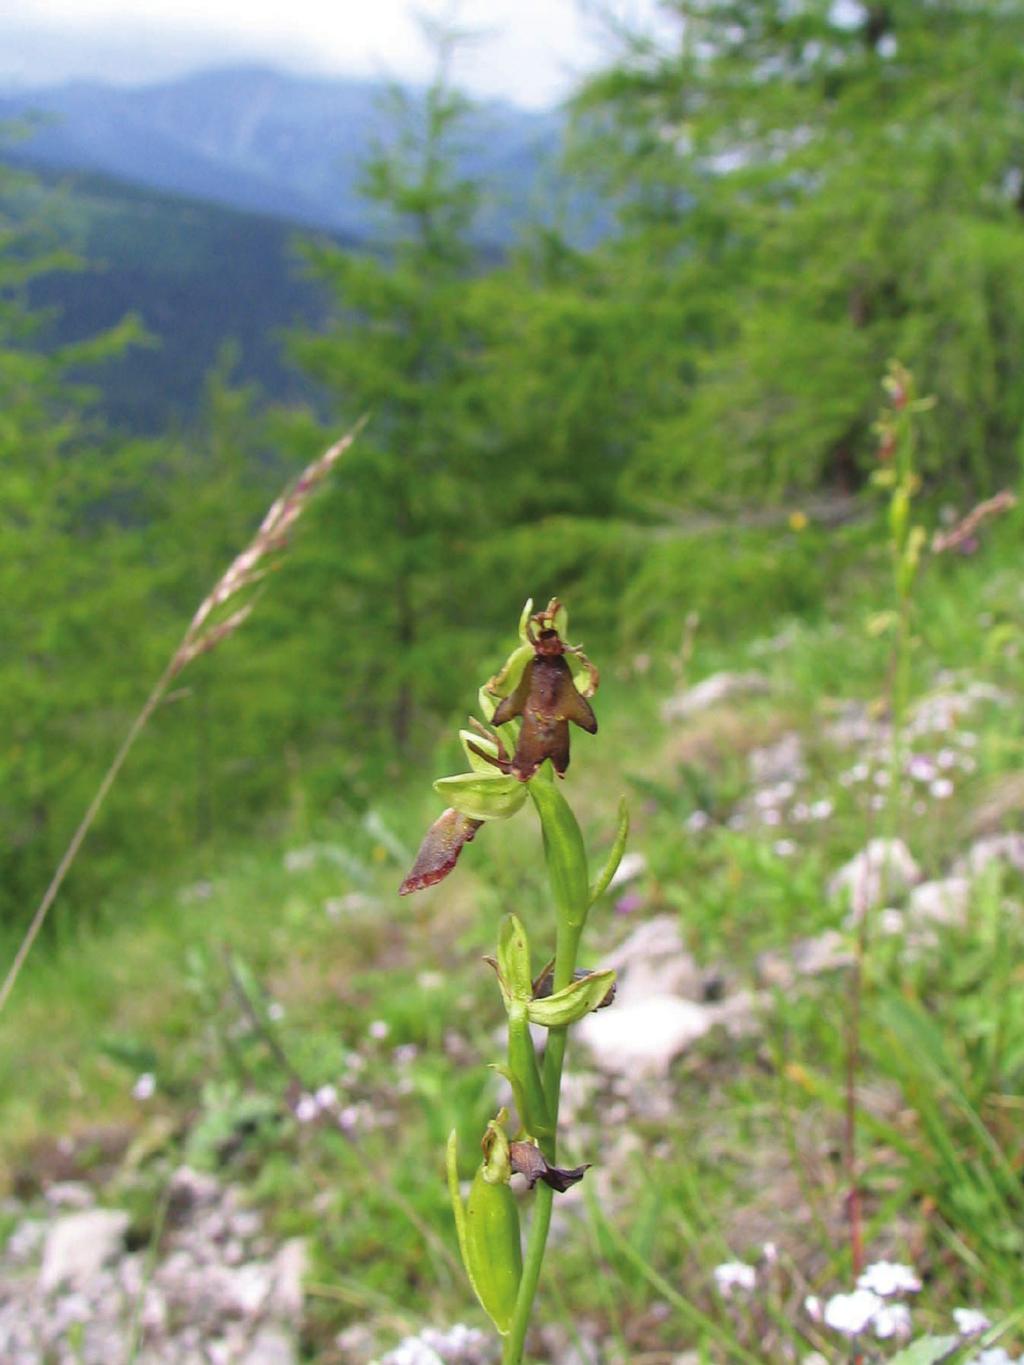 Ryc. 1. Dwulistnik muszy fragment kwiatostanu (25.06.2007; fot. E. Walusiak). Fig. 1. Inflorescence of fly orchid Ophrys insectifera (25 June 2007; photo by E.